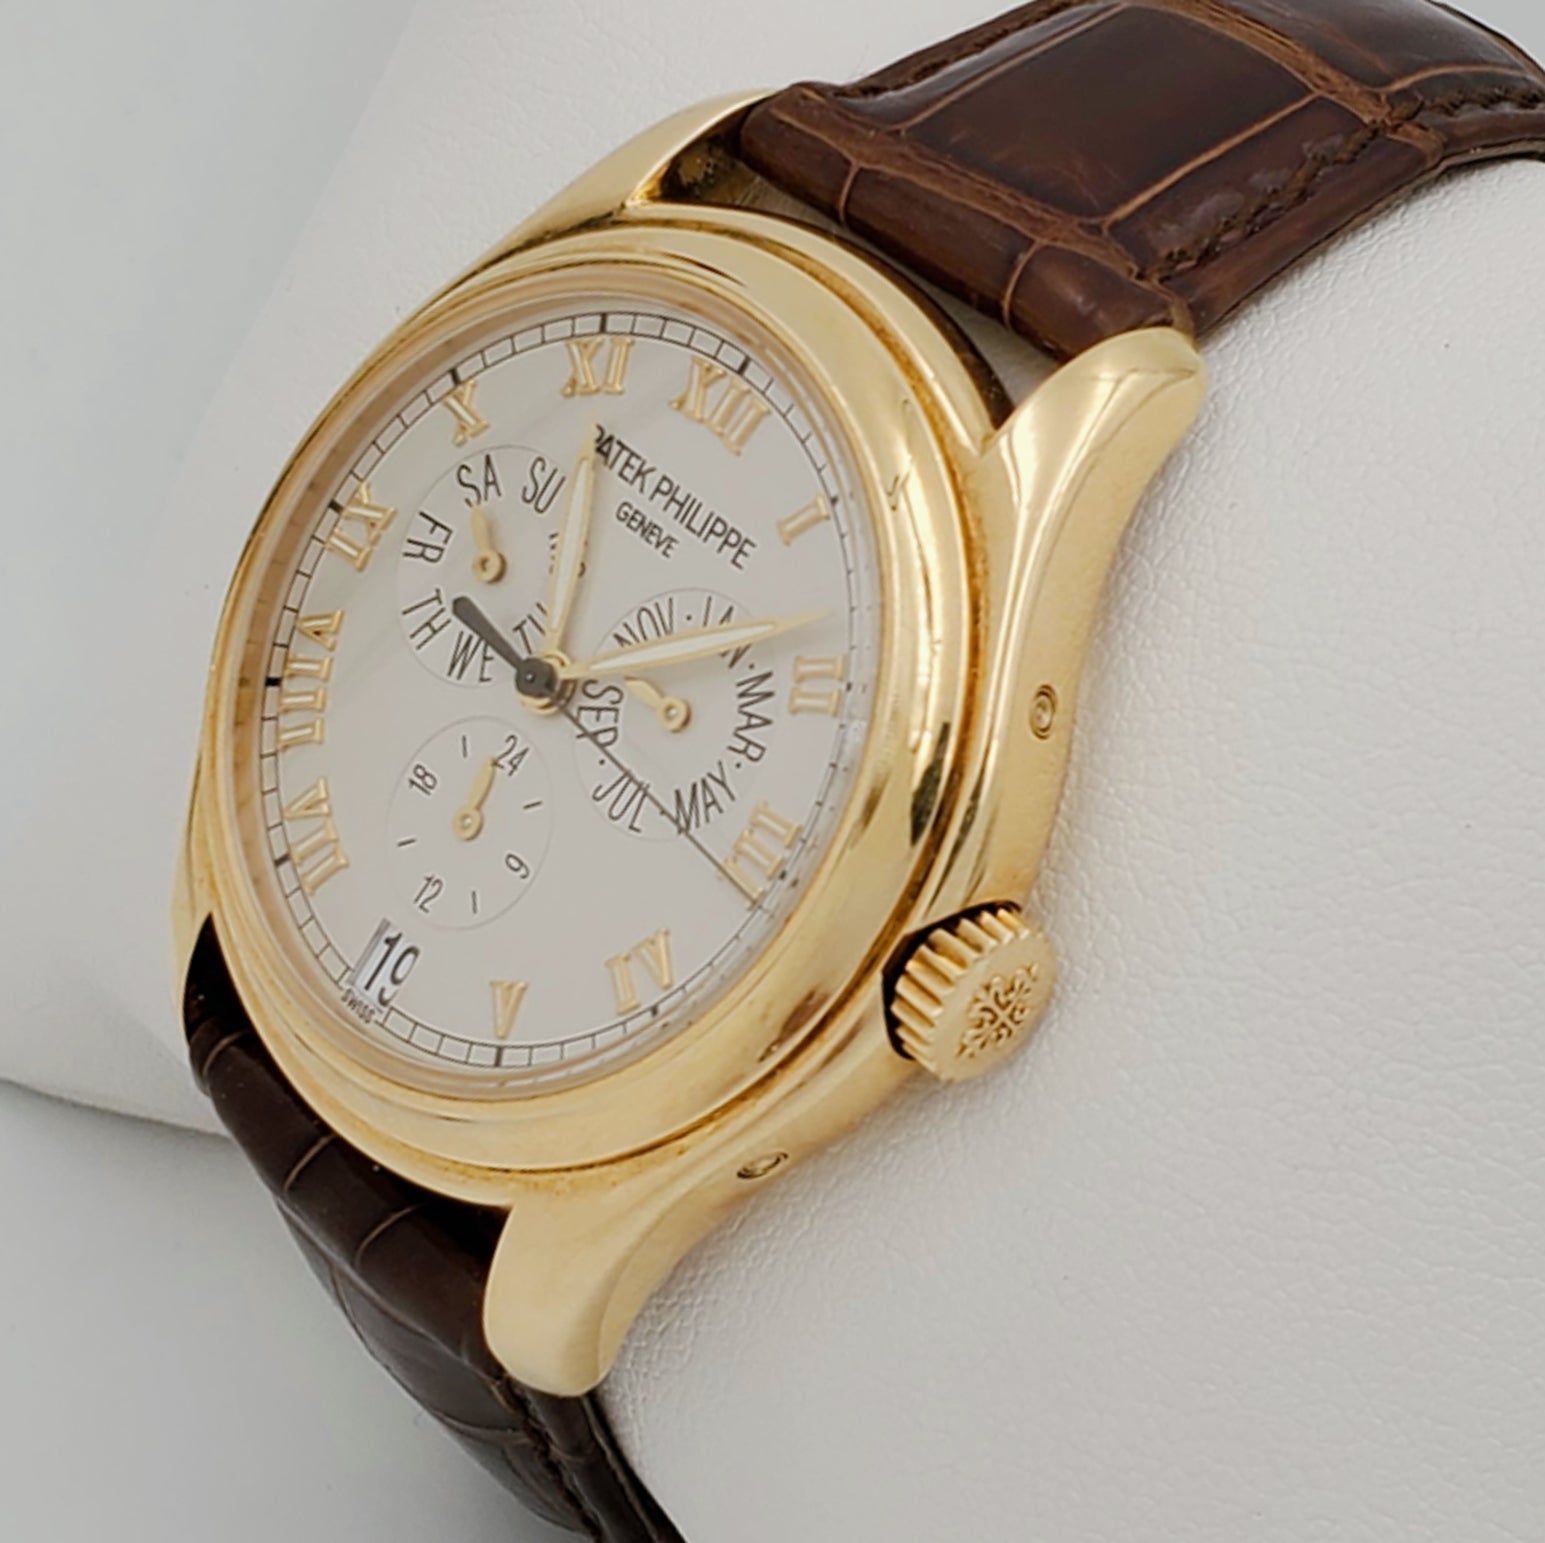 Men's Patek Philippe Complications 18K Gold Yellow Gold Automatic Wrist Watch with Annual Calendar. (Pre-Owned Model 5035)